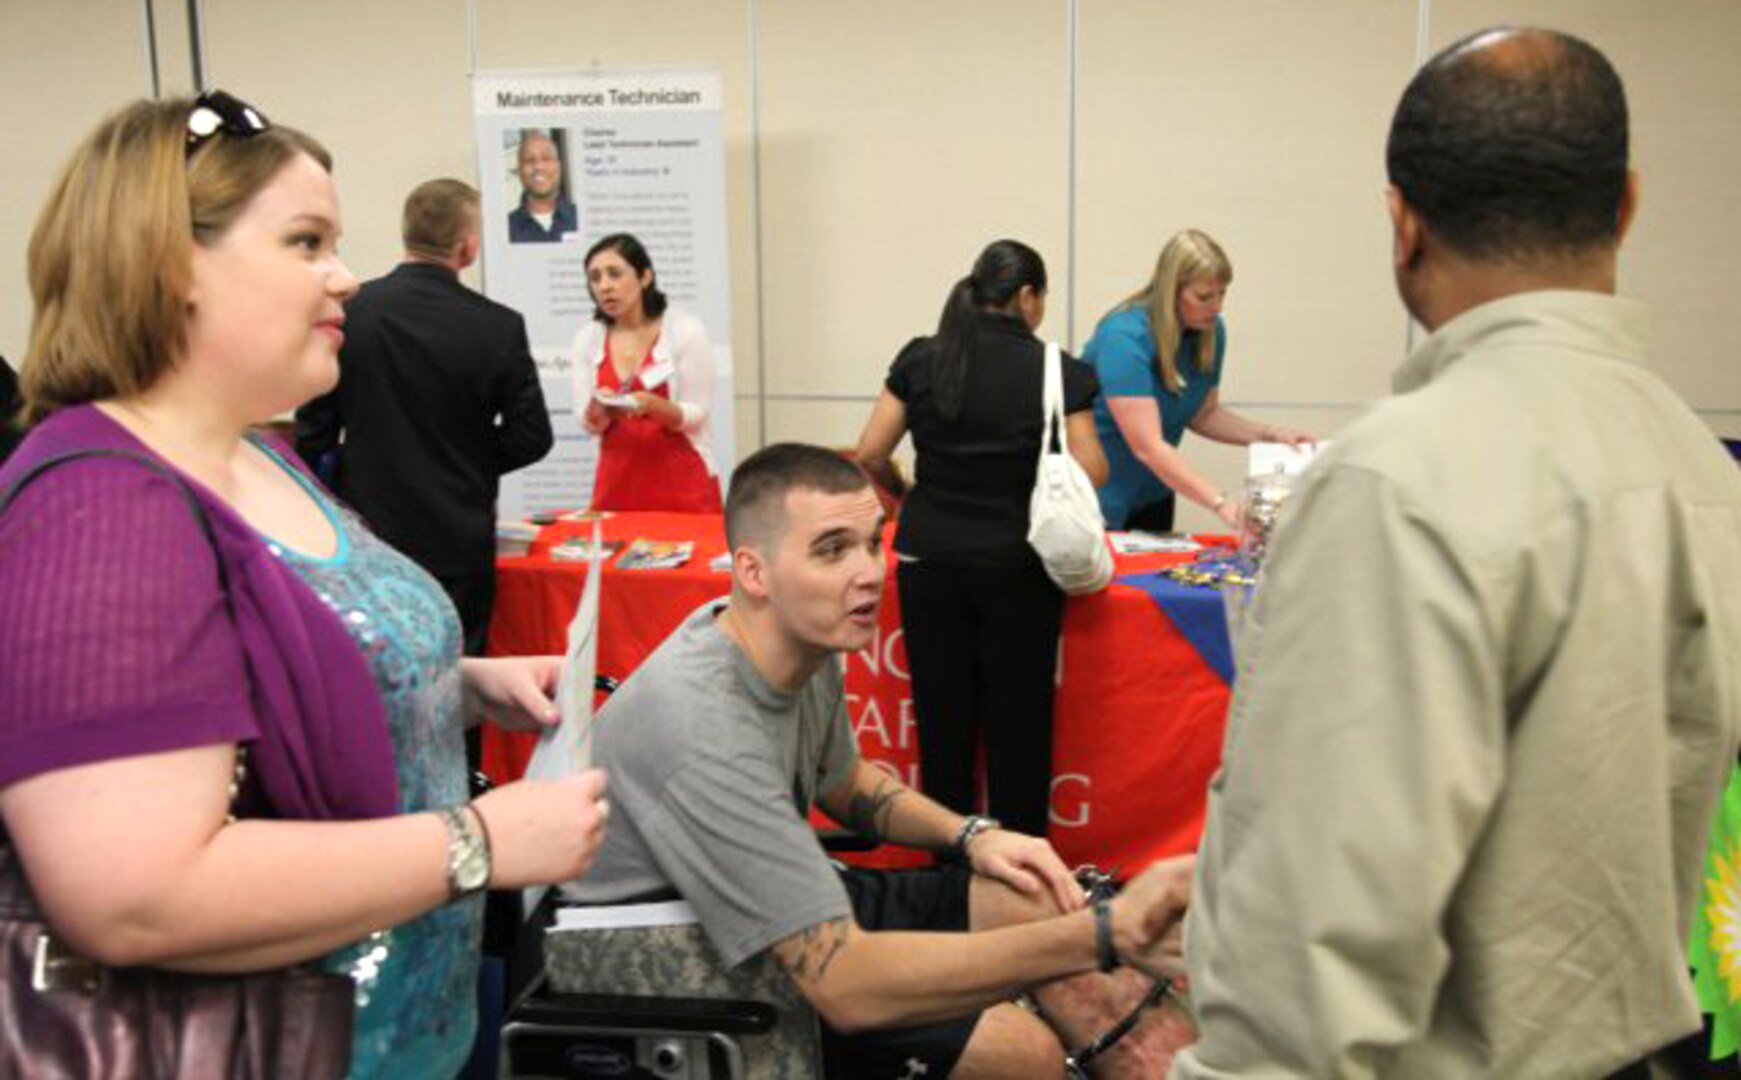 A wounded warrior meets with a recruiter at the Joint Base San Antonio-Fort Sam Houston Defense Department Hiring Heroes Career Fair at the Sam Houston Community Center Sept. 18 to explore employment opportunities after leaving the military. Hiring Heroes Career Fair representatives work with transitioning military, their spouses and veterans hoping to match individual skill sets to a potential employer’s specific needs. (Photo by Robet Dozier, US Army Installation Magaement Command Public Affairs)

